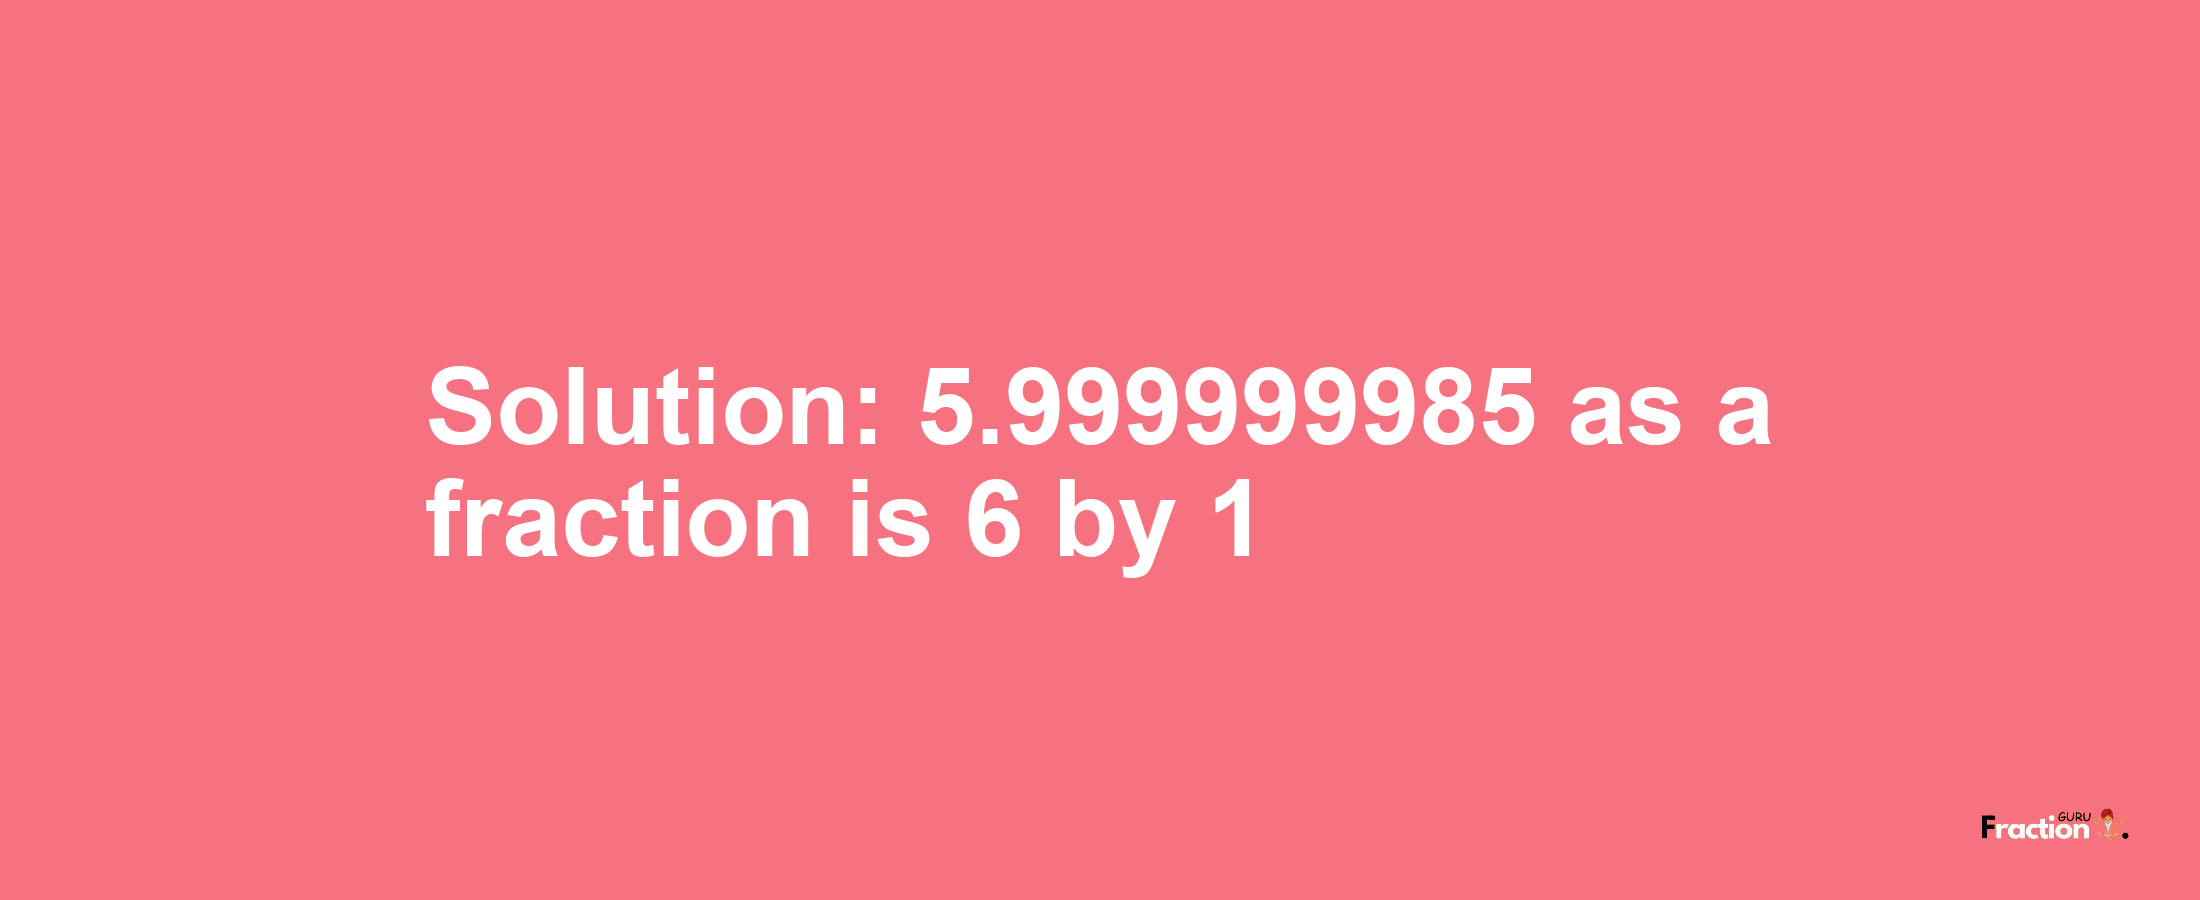 Solution:5.999999985 as a fraction is 6/1